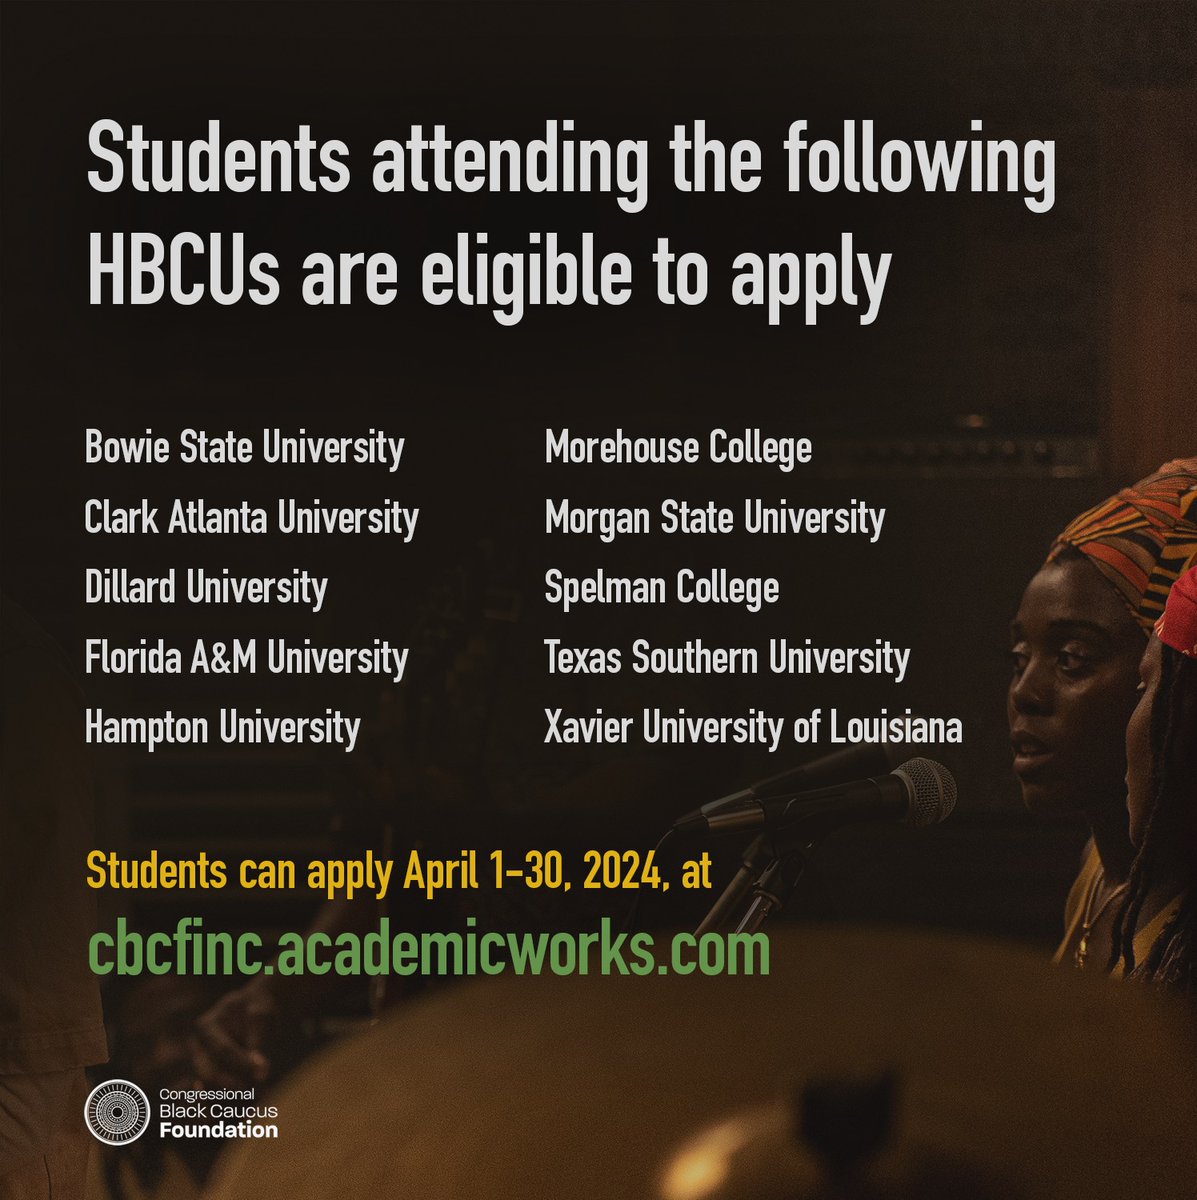 #OneLoveGivesForward, the impact continues! ☝🏾❤️🇺🇸 in partnership with the Congressional Black Caucus Foundation, ‘#BobMarley: @OneLoveMovie’ is now offering 10 scholarships to current undergraduate students at HBCUs pursuing social justice-related degrees. Applications are open…